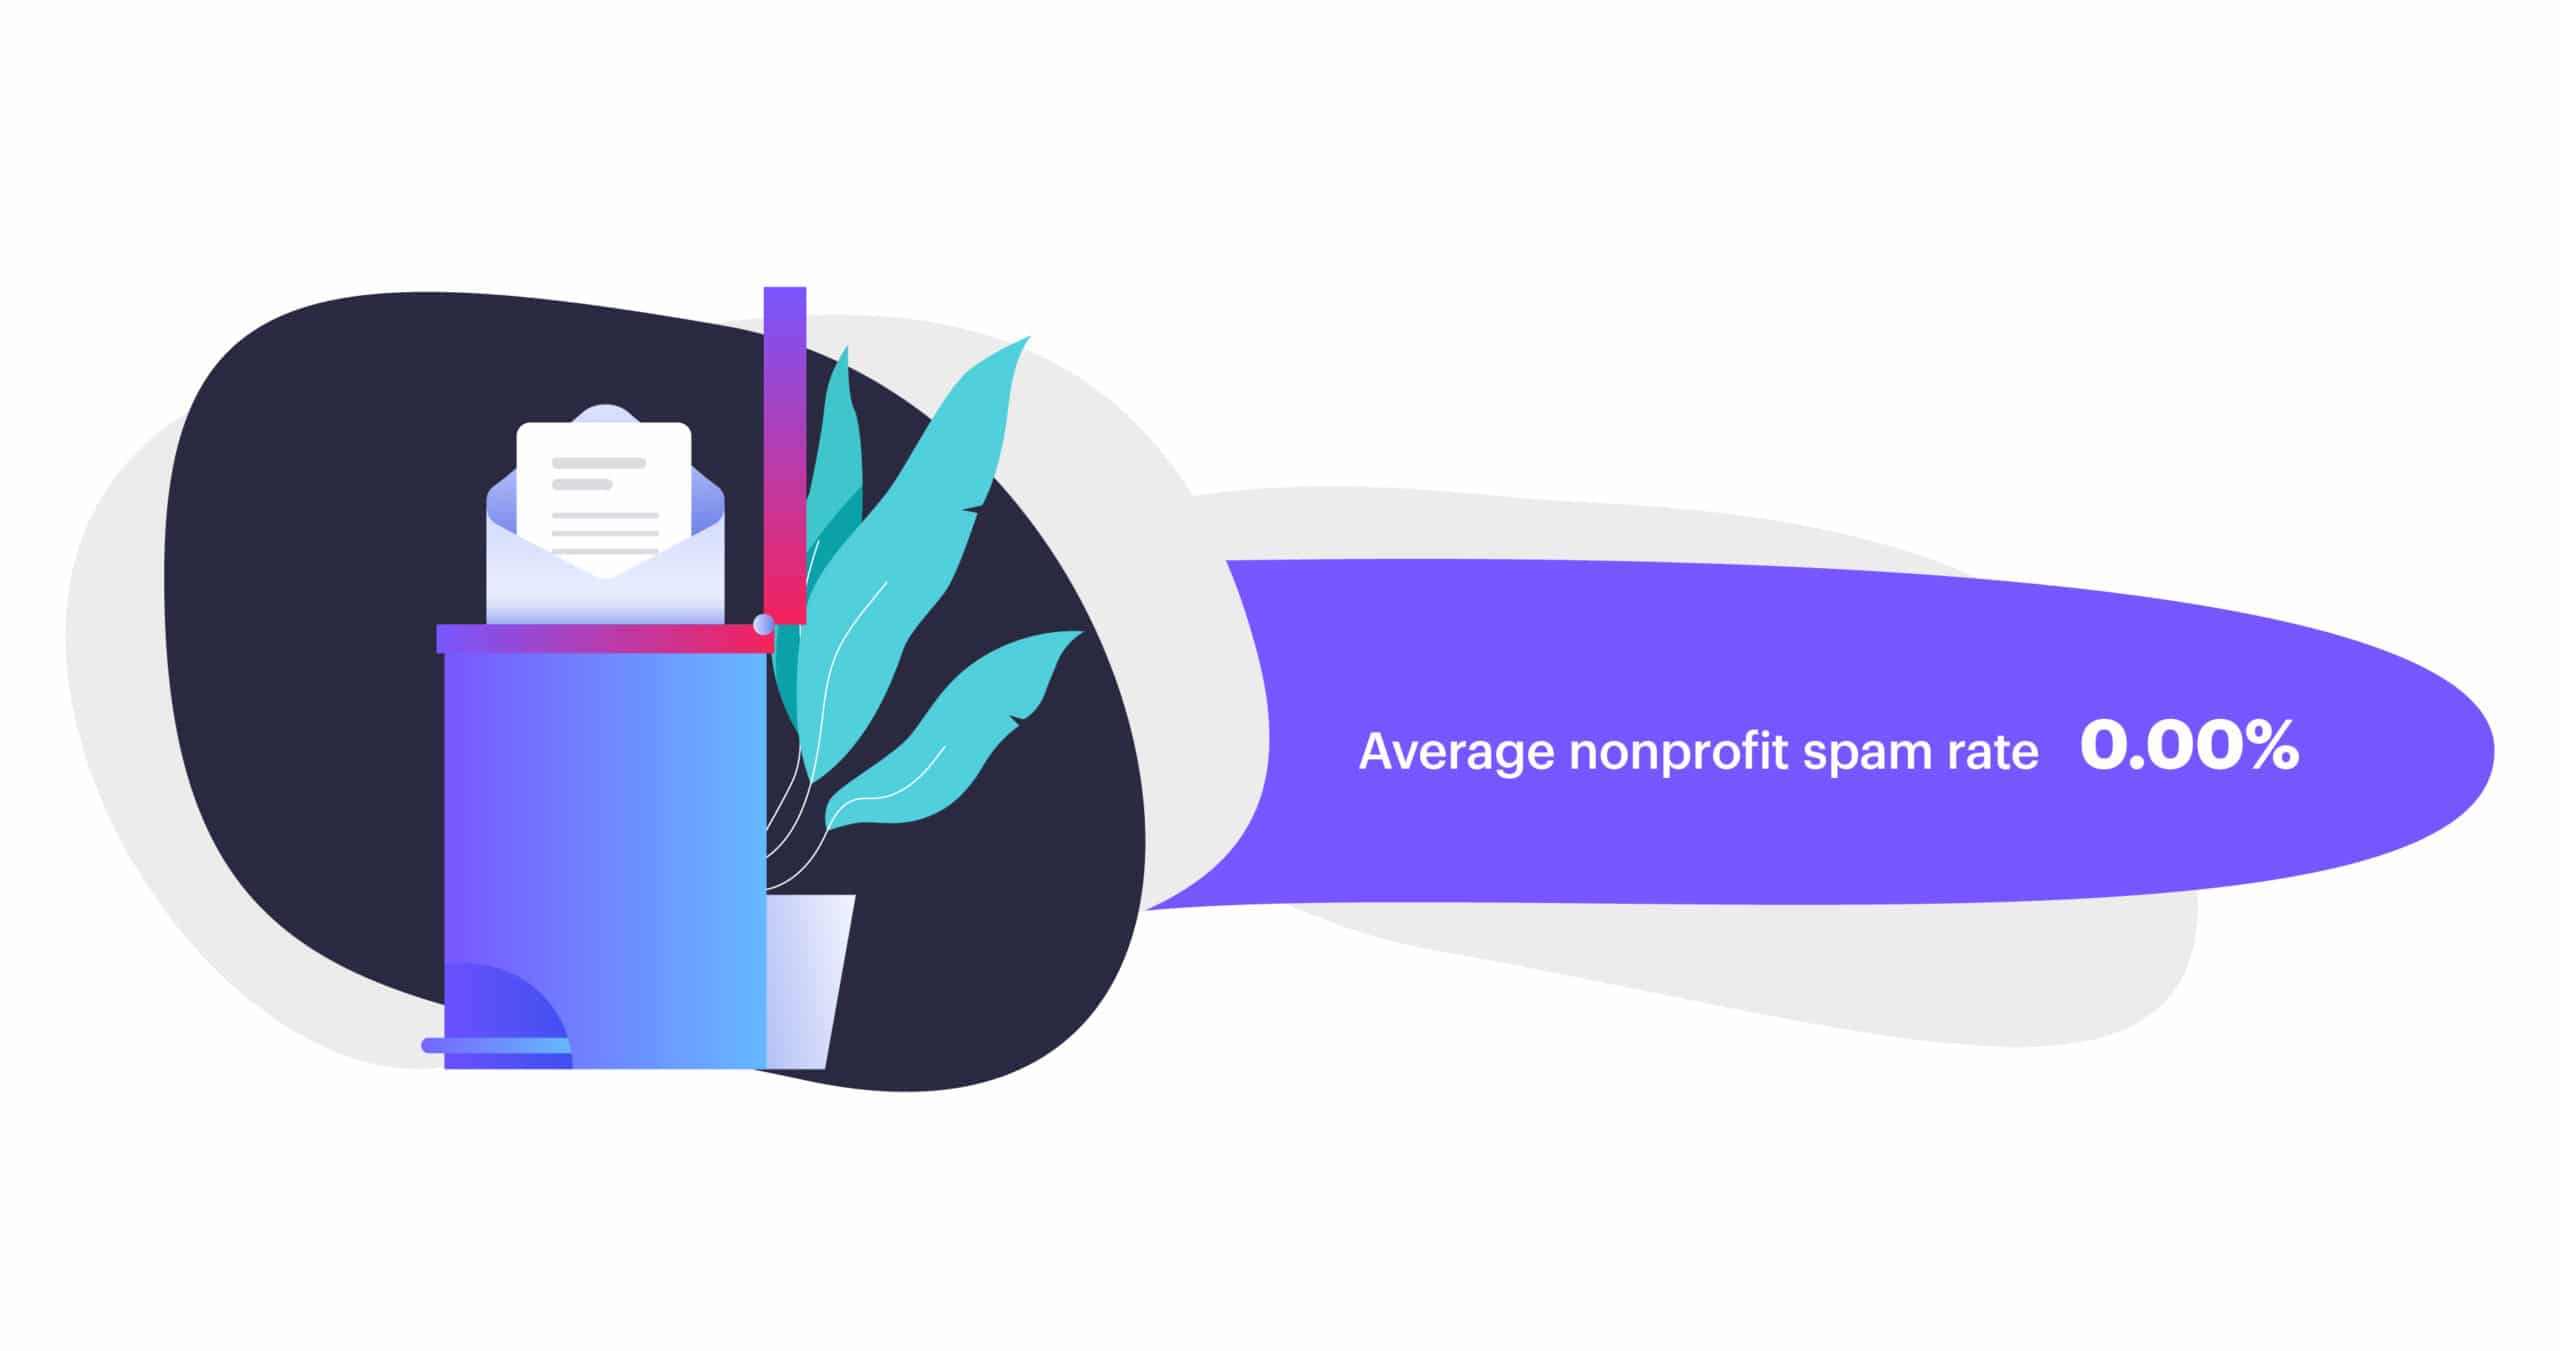 Spam rate was 0% for nonprofit email marketing